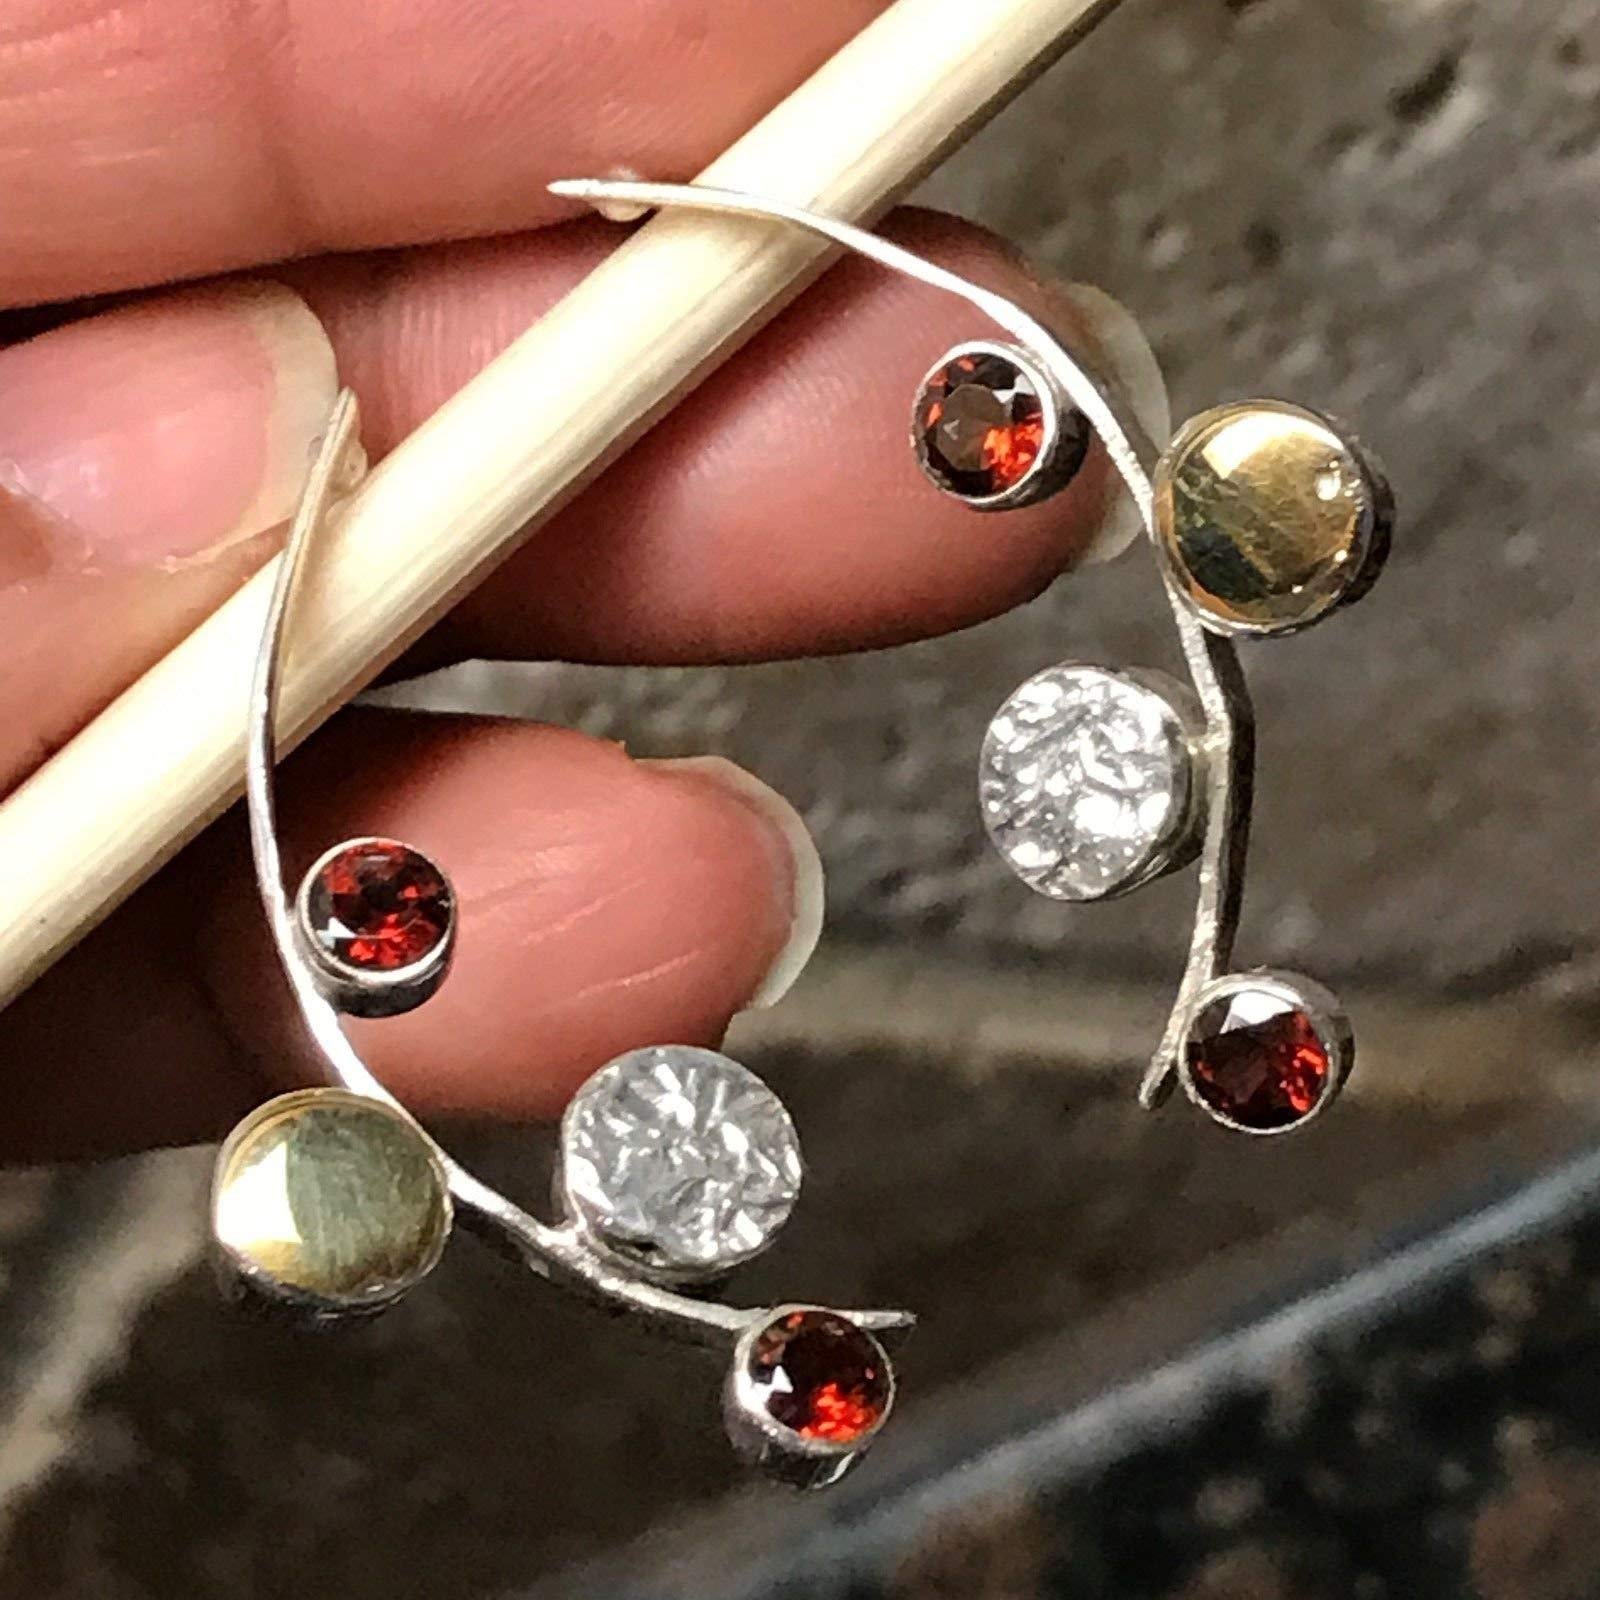 Natural 2ct Fire Garnet 925 Solid Sterling Silver Earrings 39mm - Natural Rocks by Kala